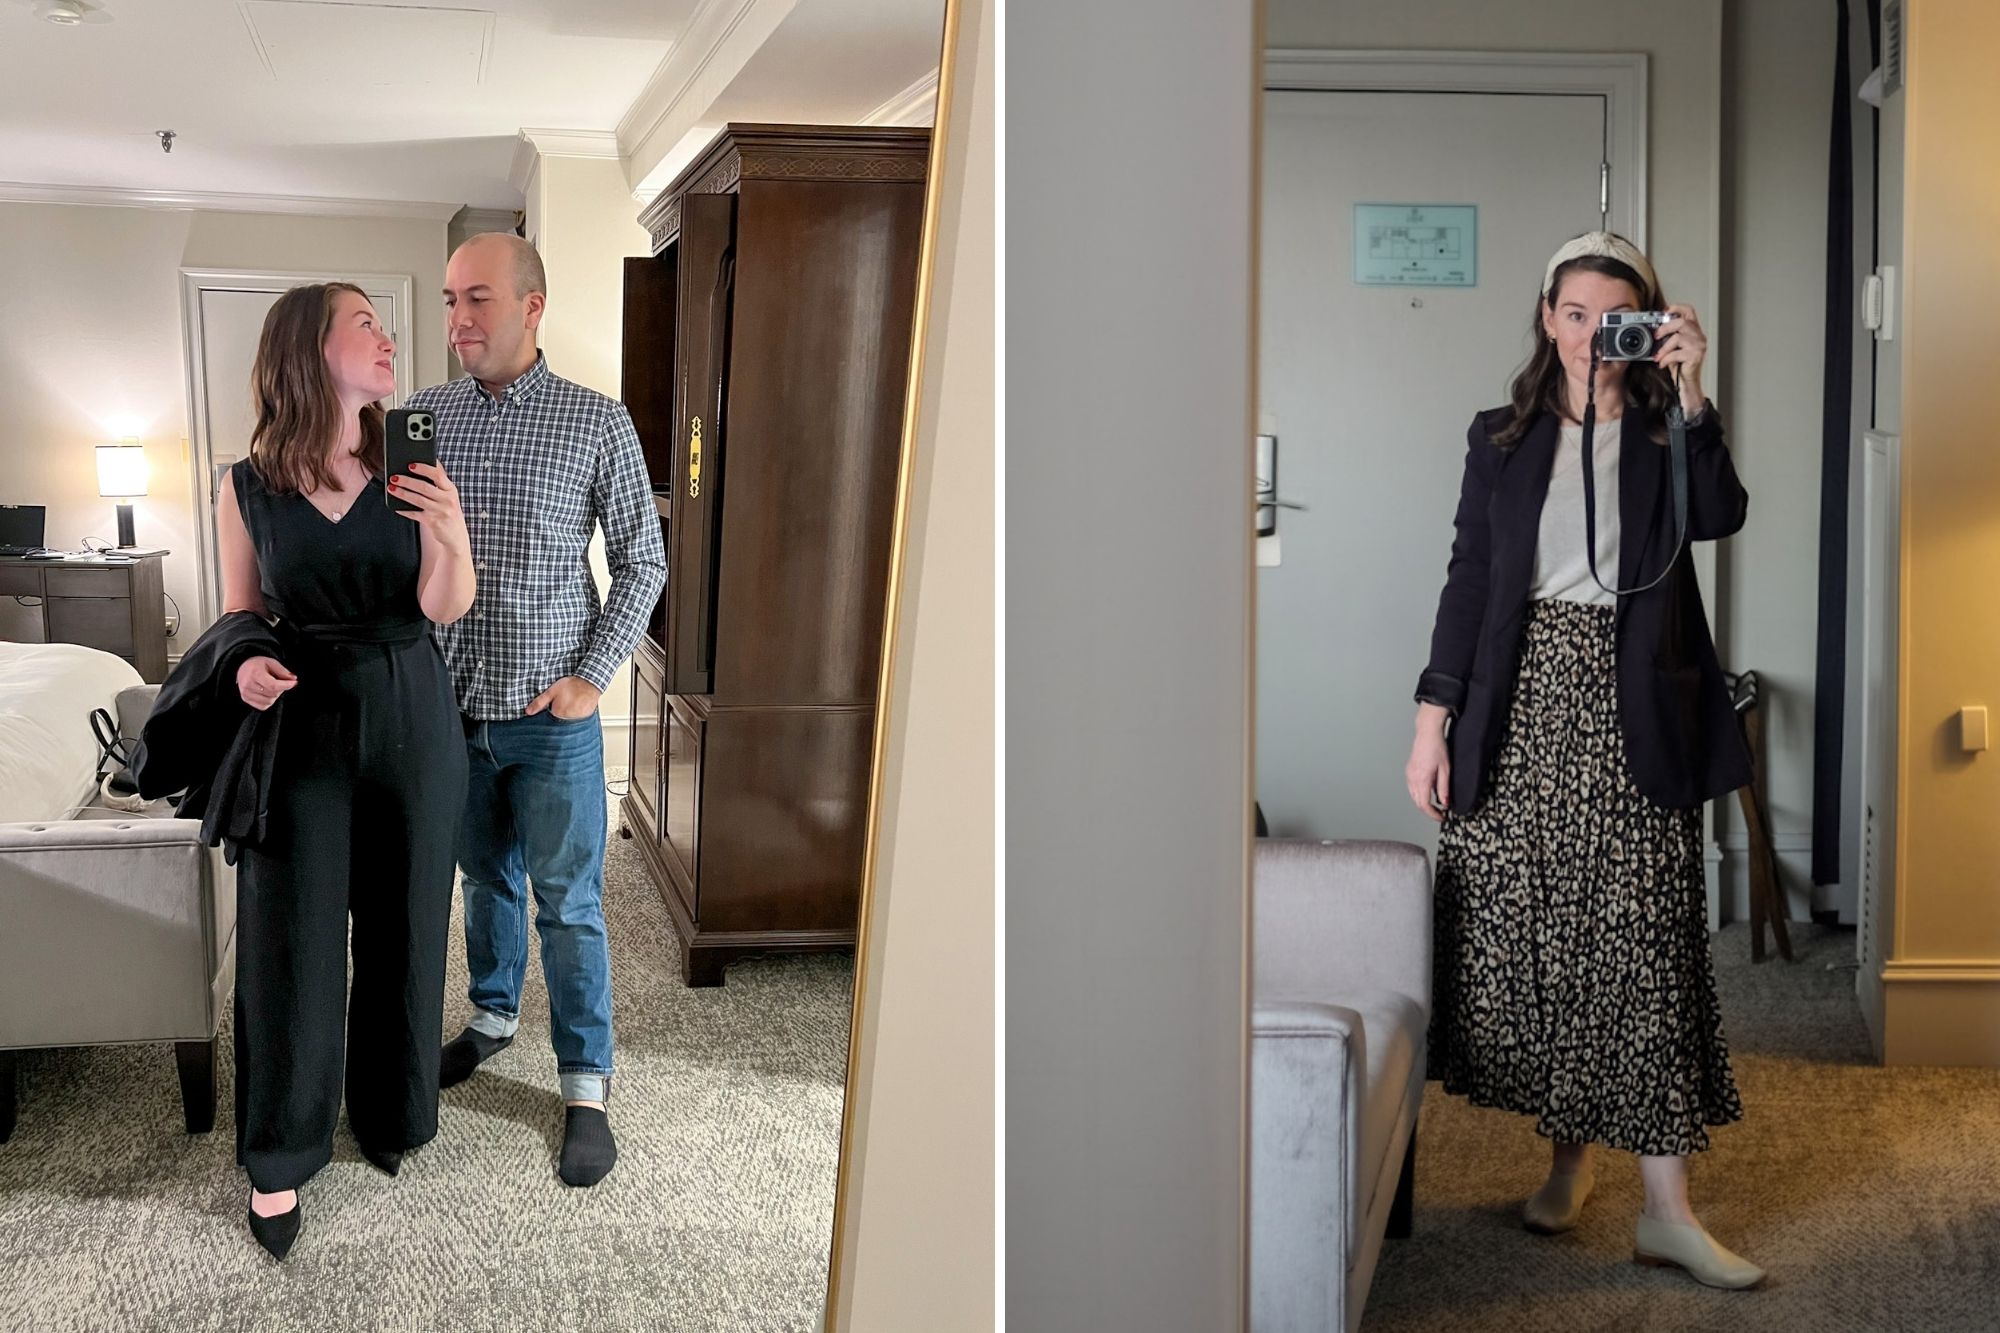 Two photos in the full length mirror - Alyssa and Michael together, and Alyssa alone